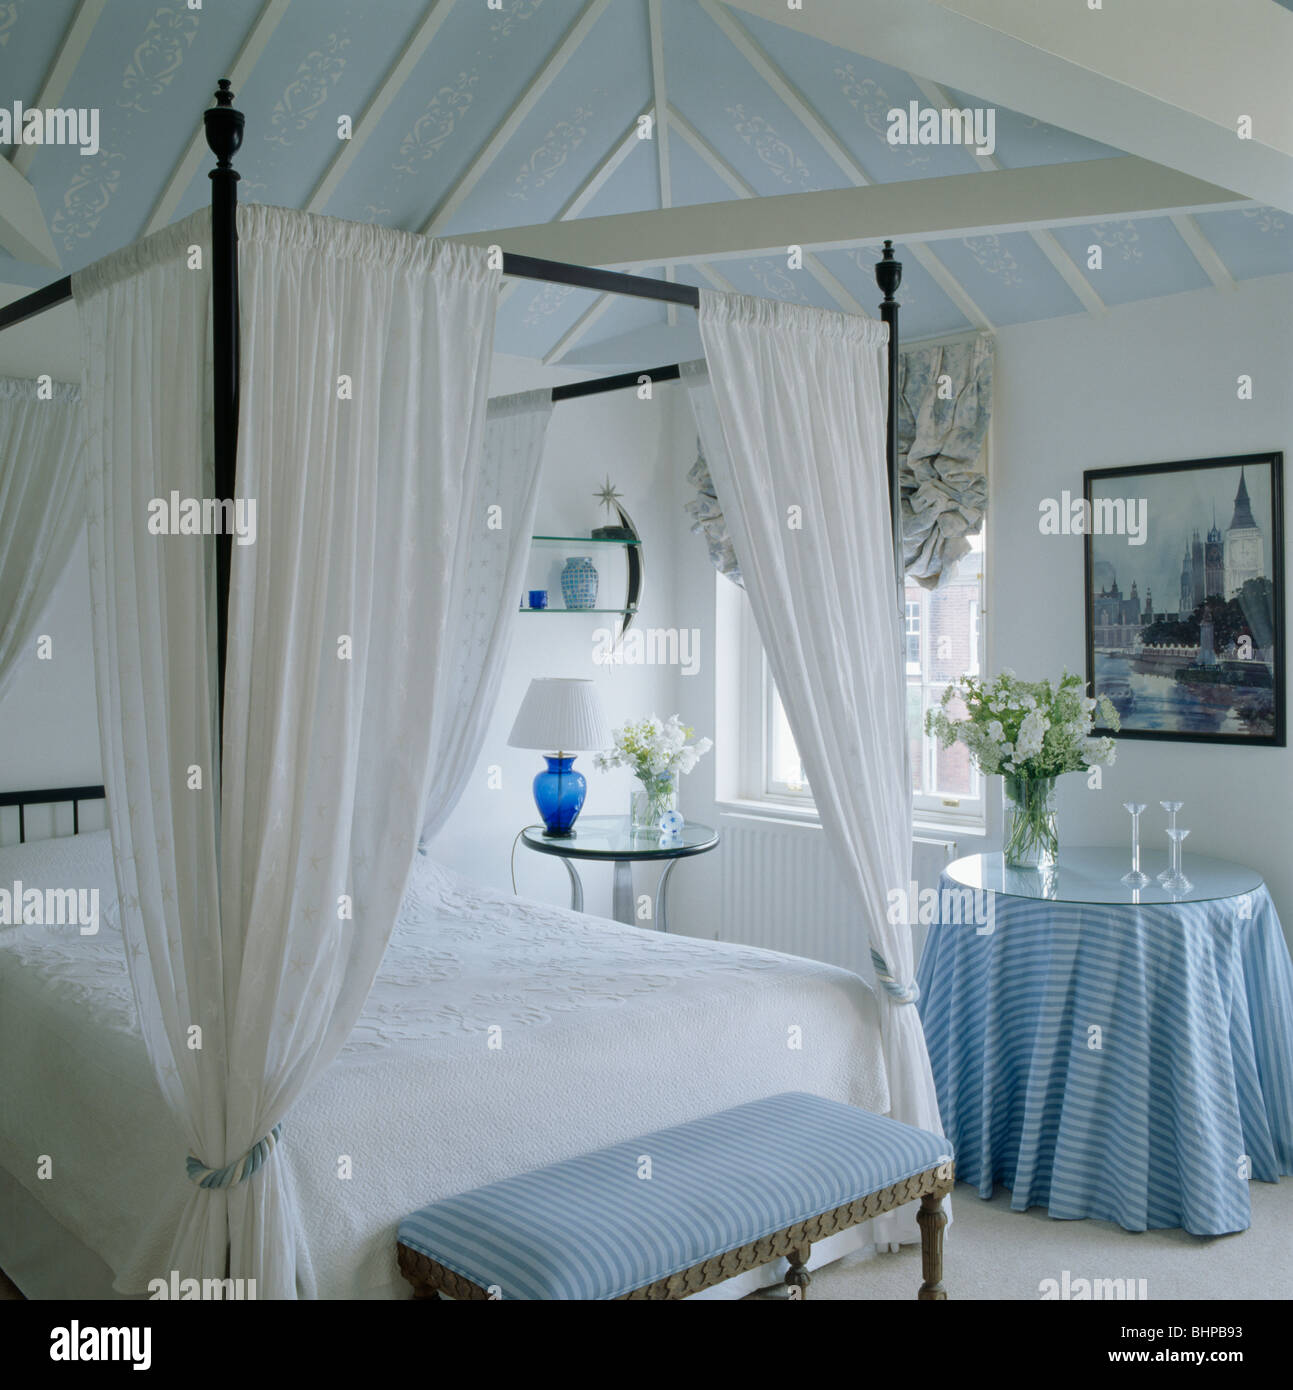 Blue upholstered stool below simple four-poster bed with white drapes and linen in white bedroom with blue cloth on round table Stock Photo